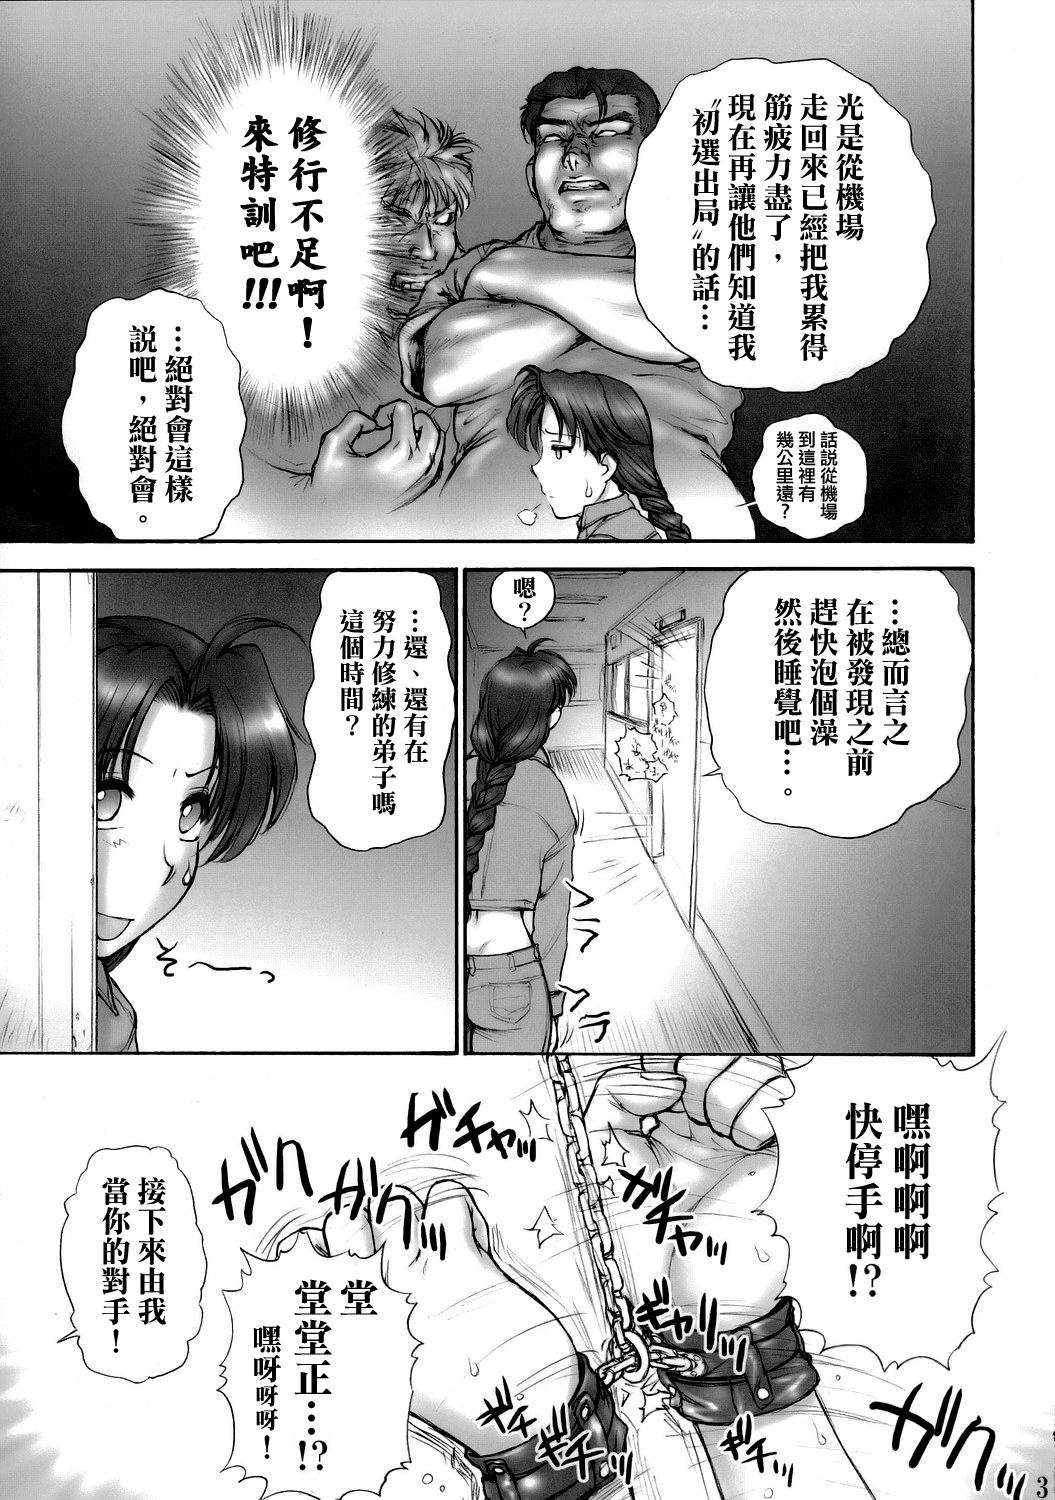 Long (SC29) [Shinnihon Pepsitou (St. Germain-sal)] Report Concerning Kyoku-gen-ryuu (The King of Fighters) [Chinese] [日祈漢化] - King of fighters Yoga - Page 5